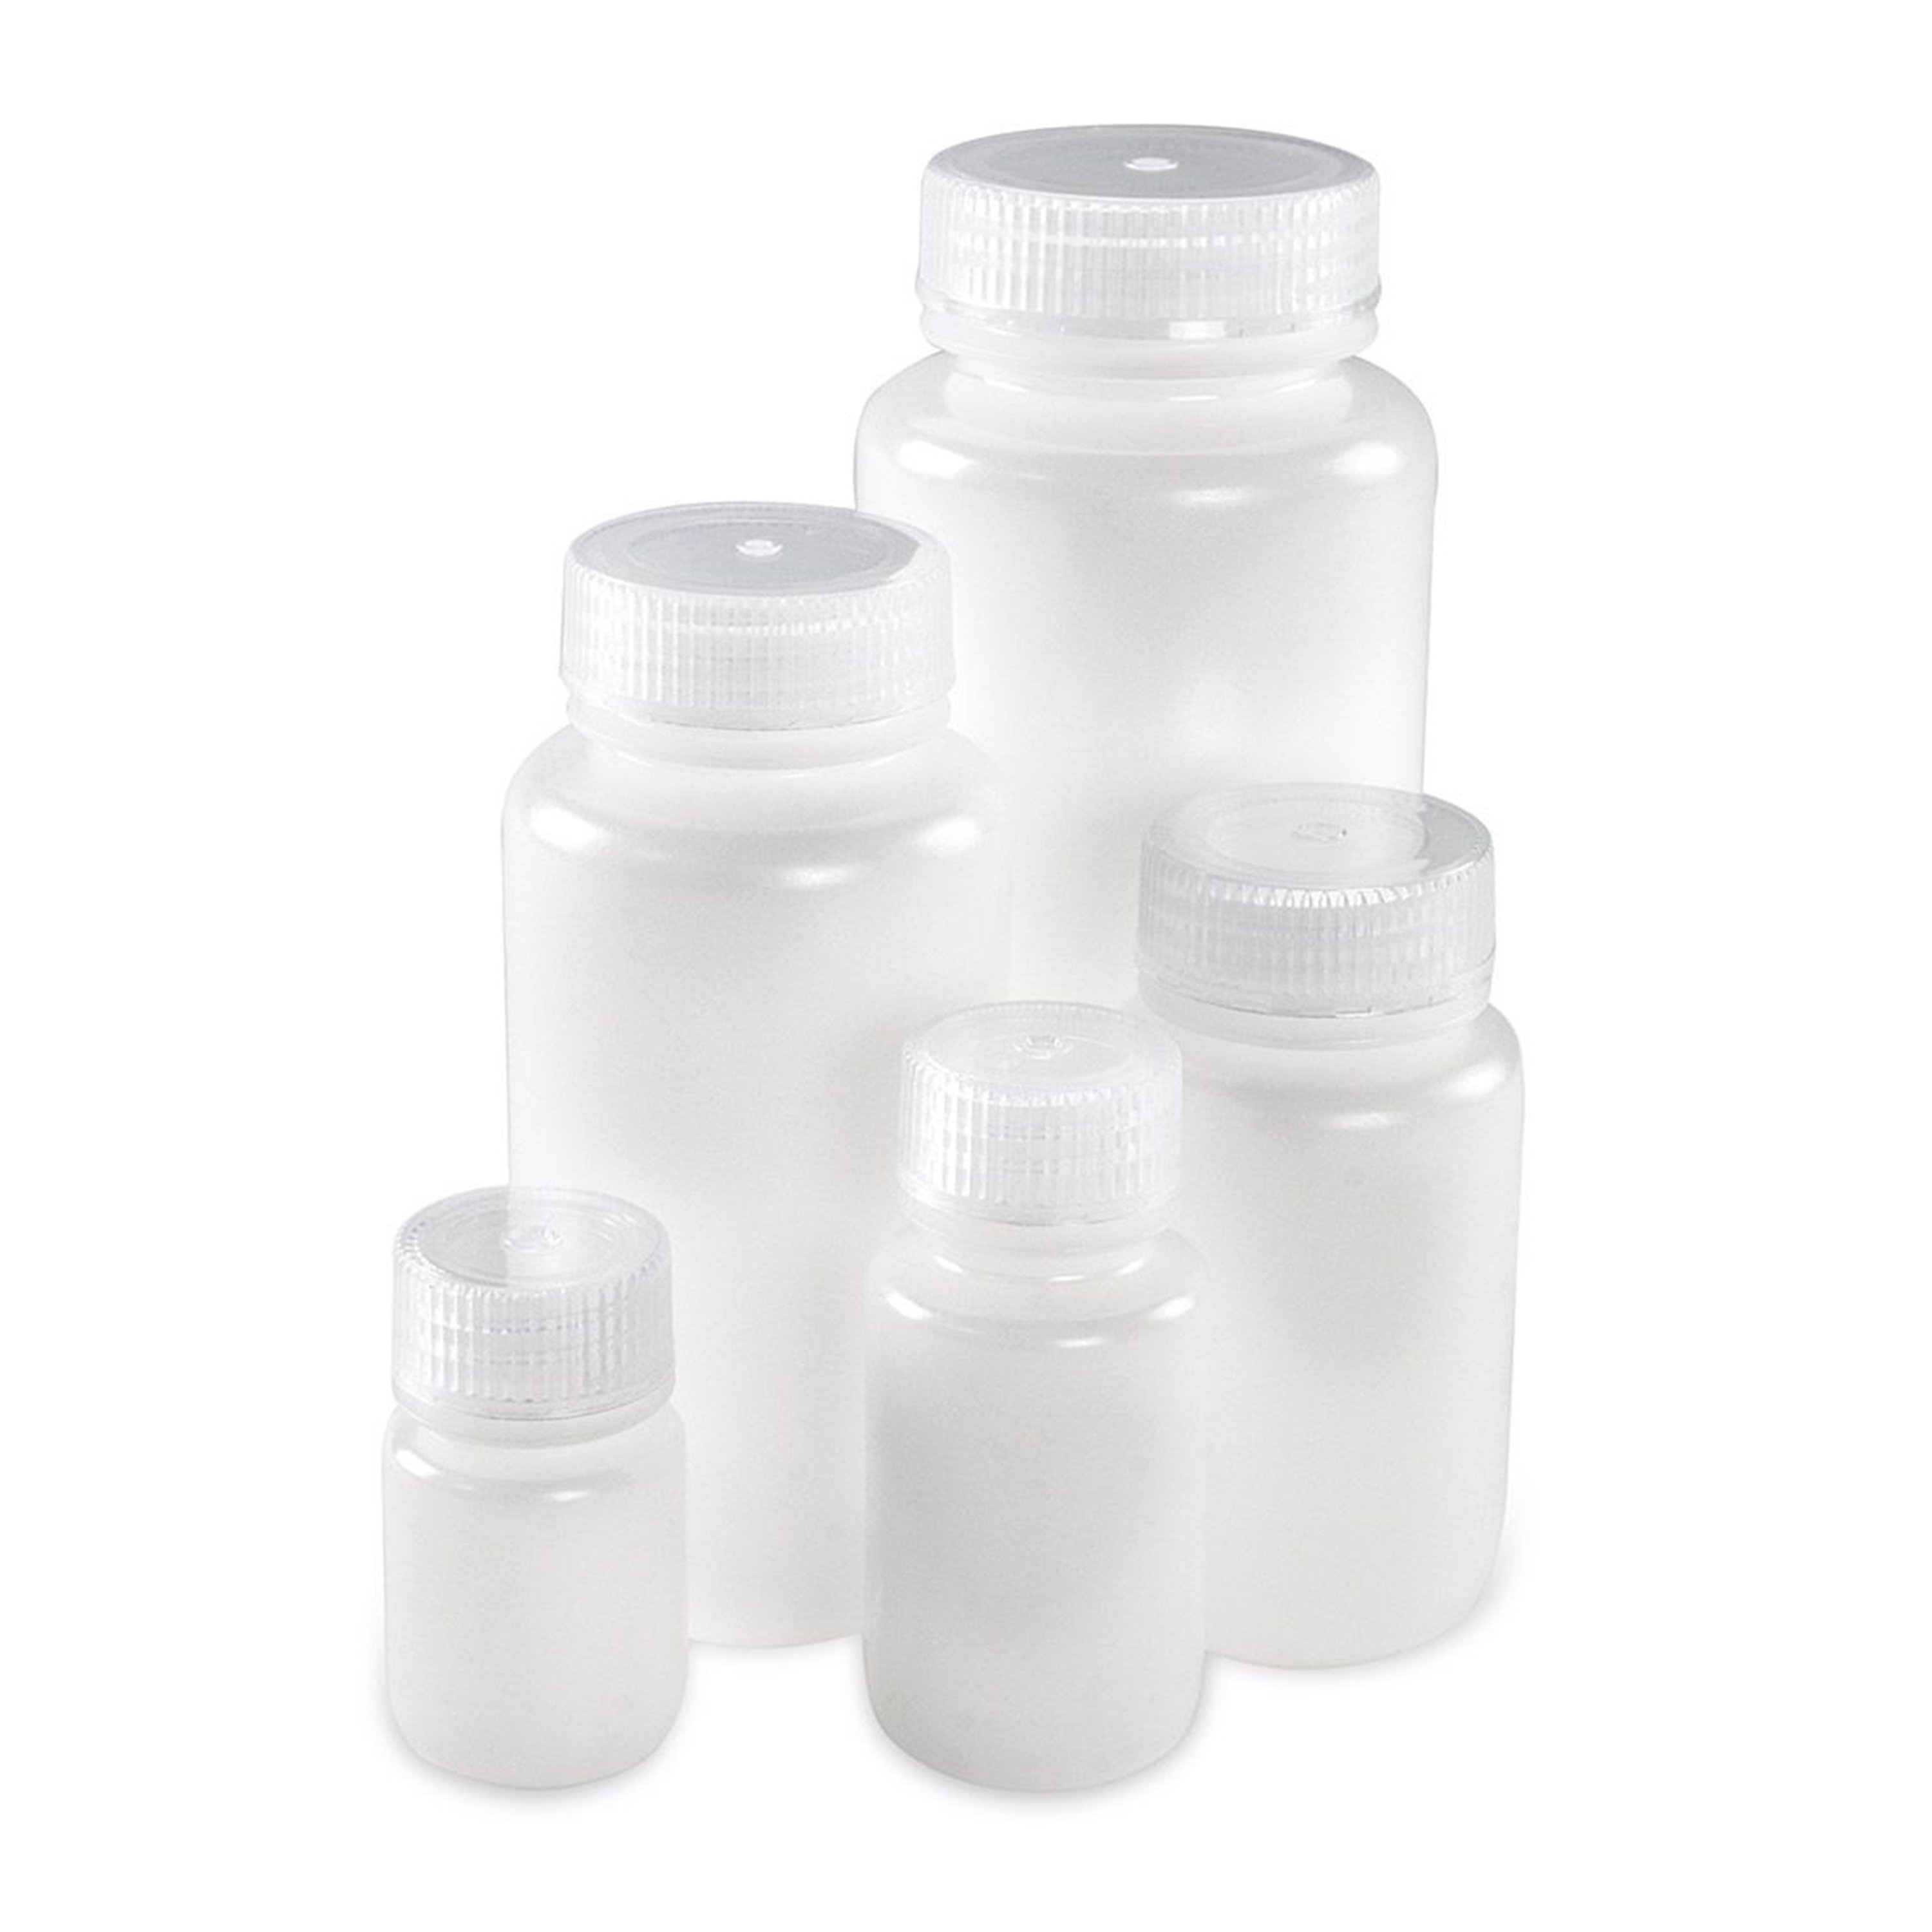 https://www.universalmedicalinc.com/media/catalog/product/cache/f176254afc5001a35a1c727280299a84/d/i/diamond-essentials-bulk-wide-mouth-boston-round-clear-hdpe-bottles-with-pp-cap.jpg